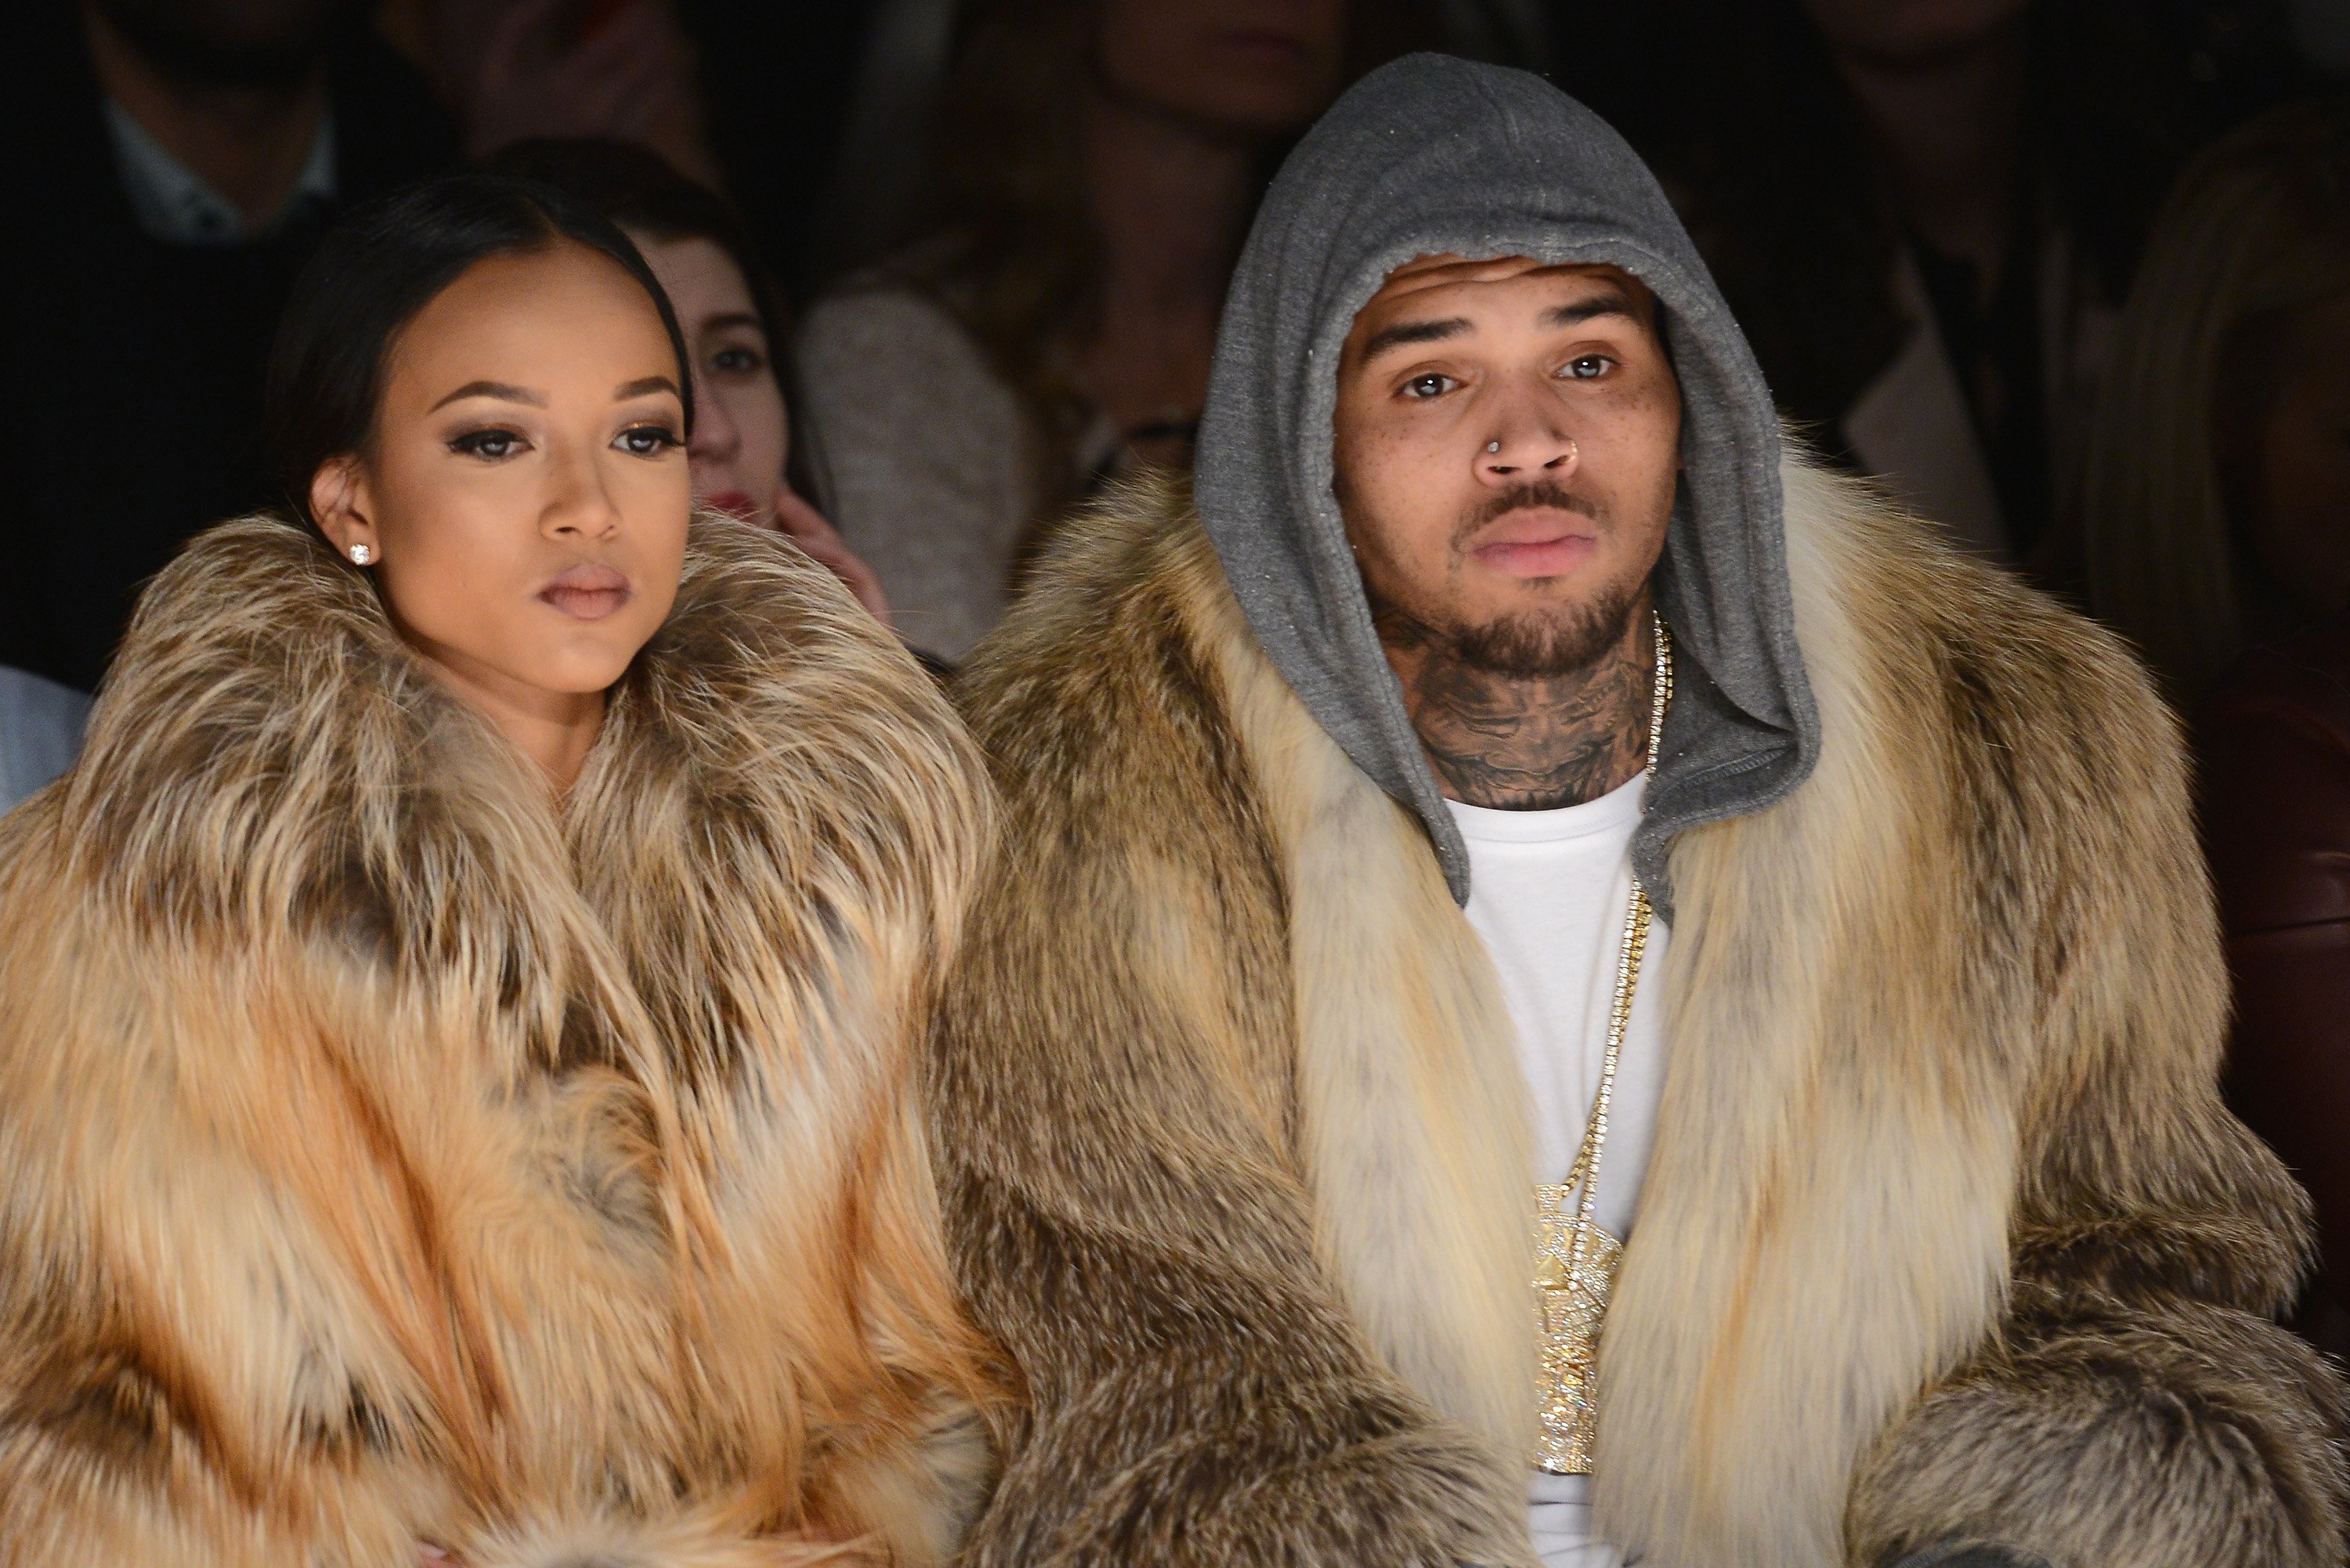  Karrueche Tran  and Chris Brown attends the Michael Costello fashion show during Mercedes-Benz Fashion Week Fall 2015 at The Salon at Lincoln Center on February 17, 2015 in New York City | Photo: GettyImages